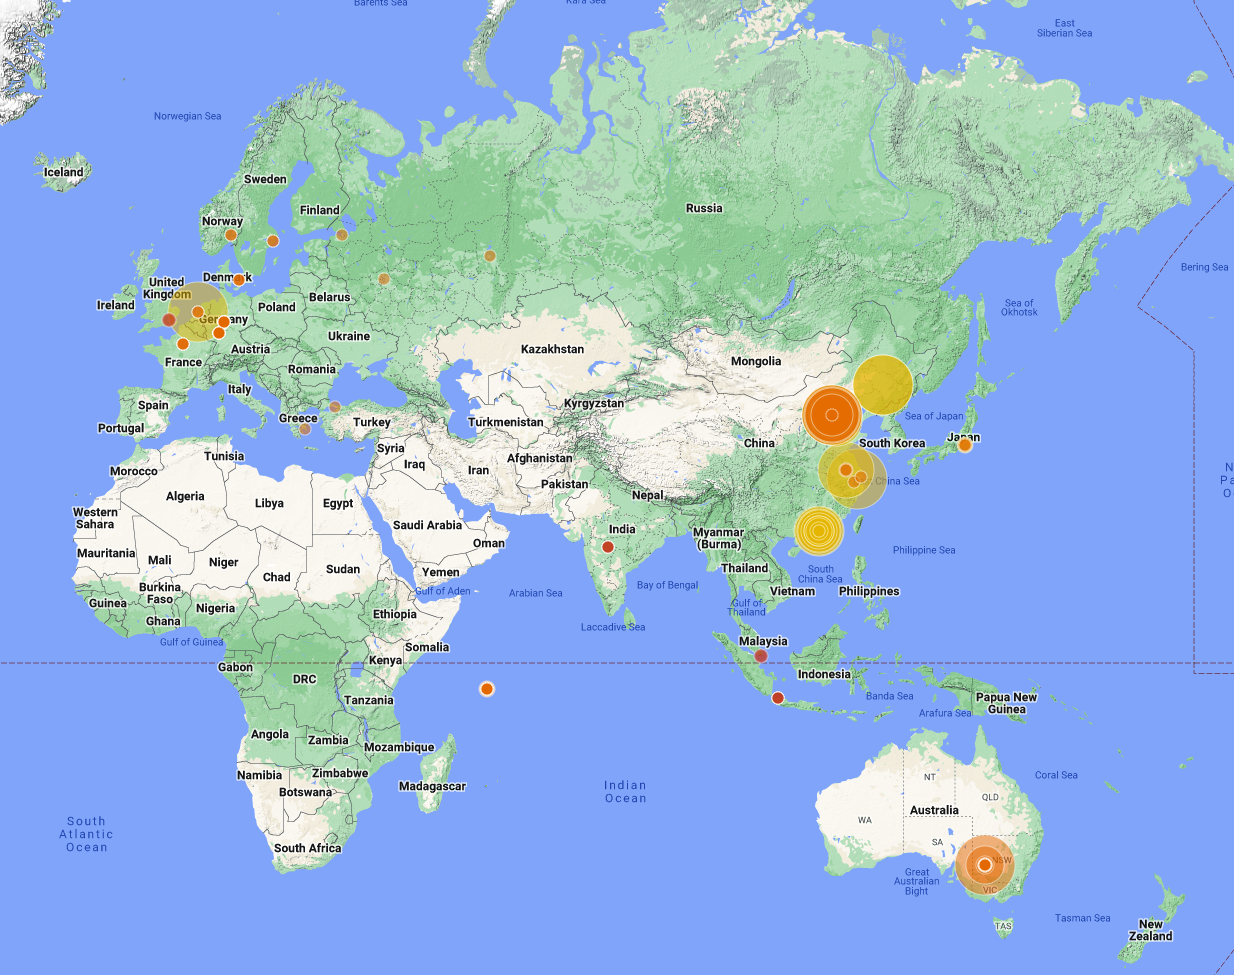 A map showing the blocked potential threats in the last 30 days